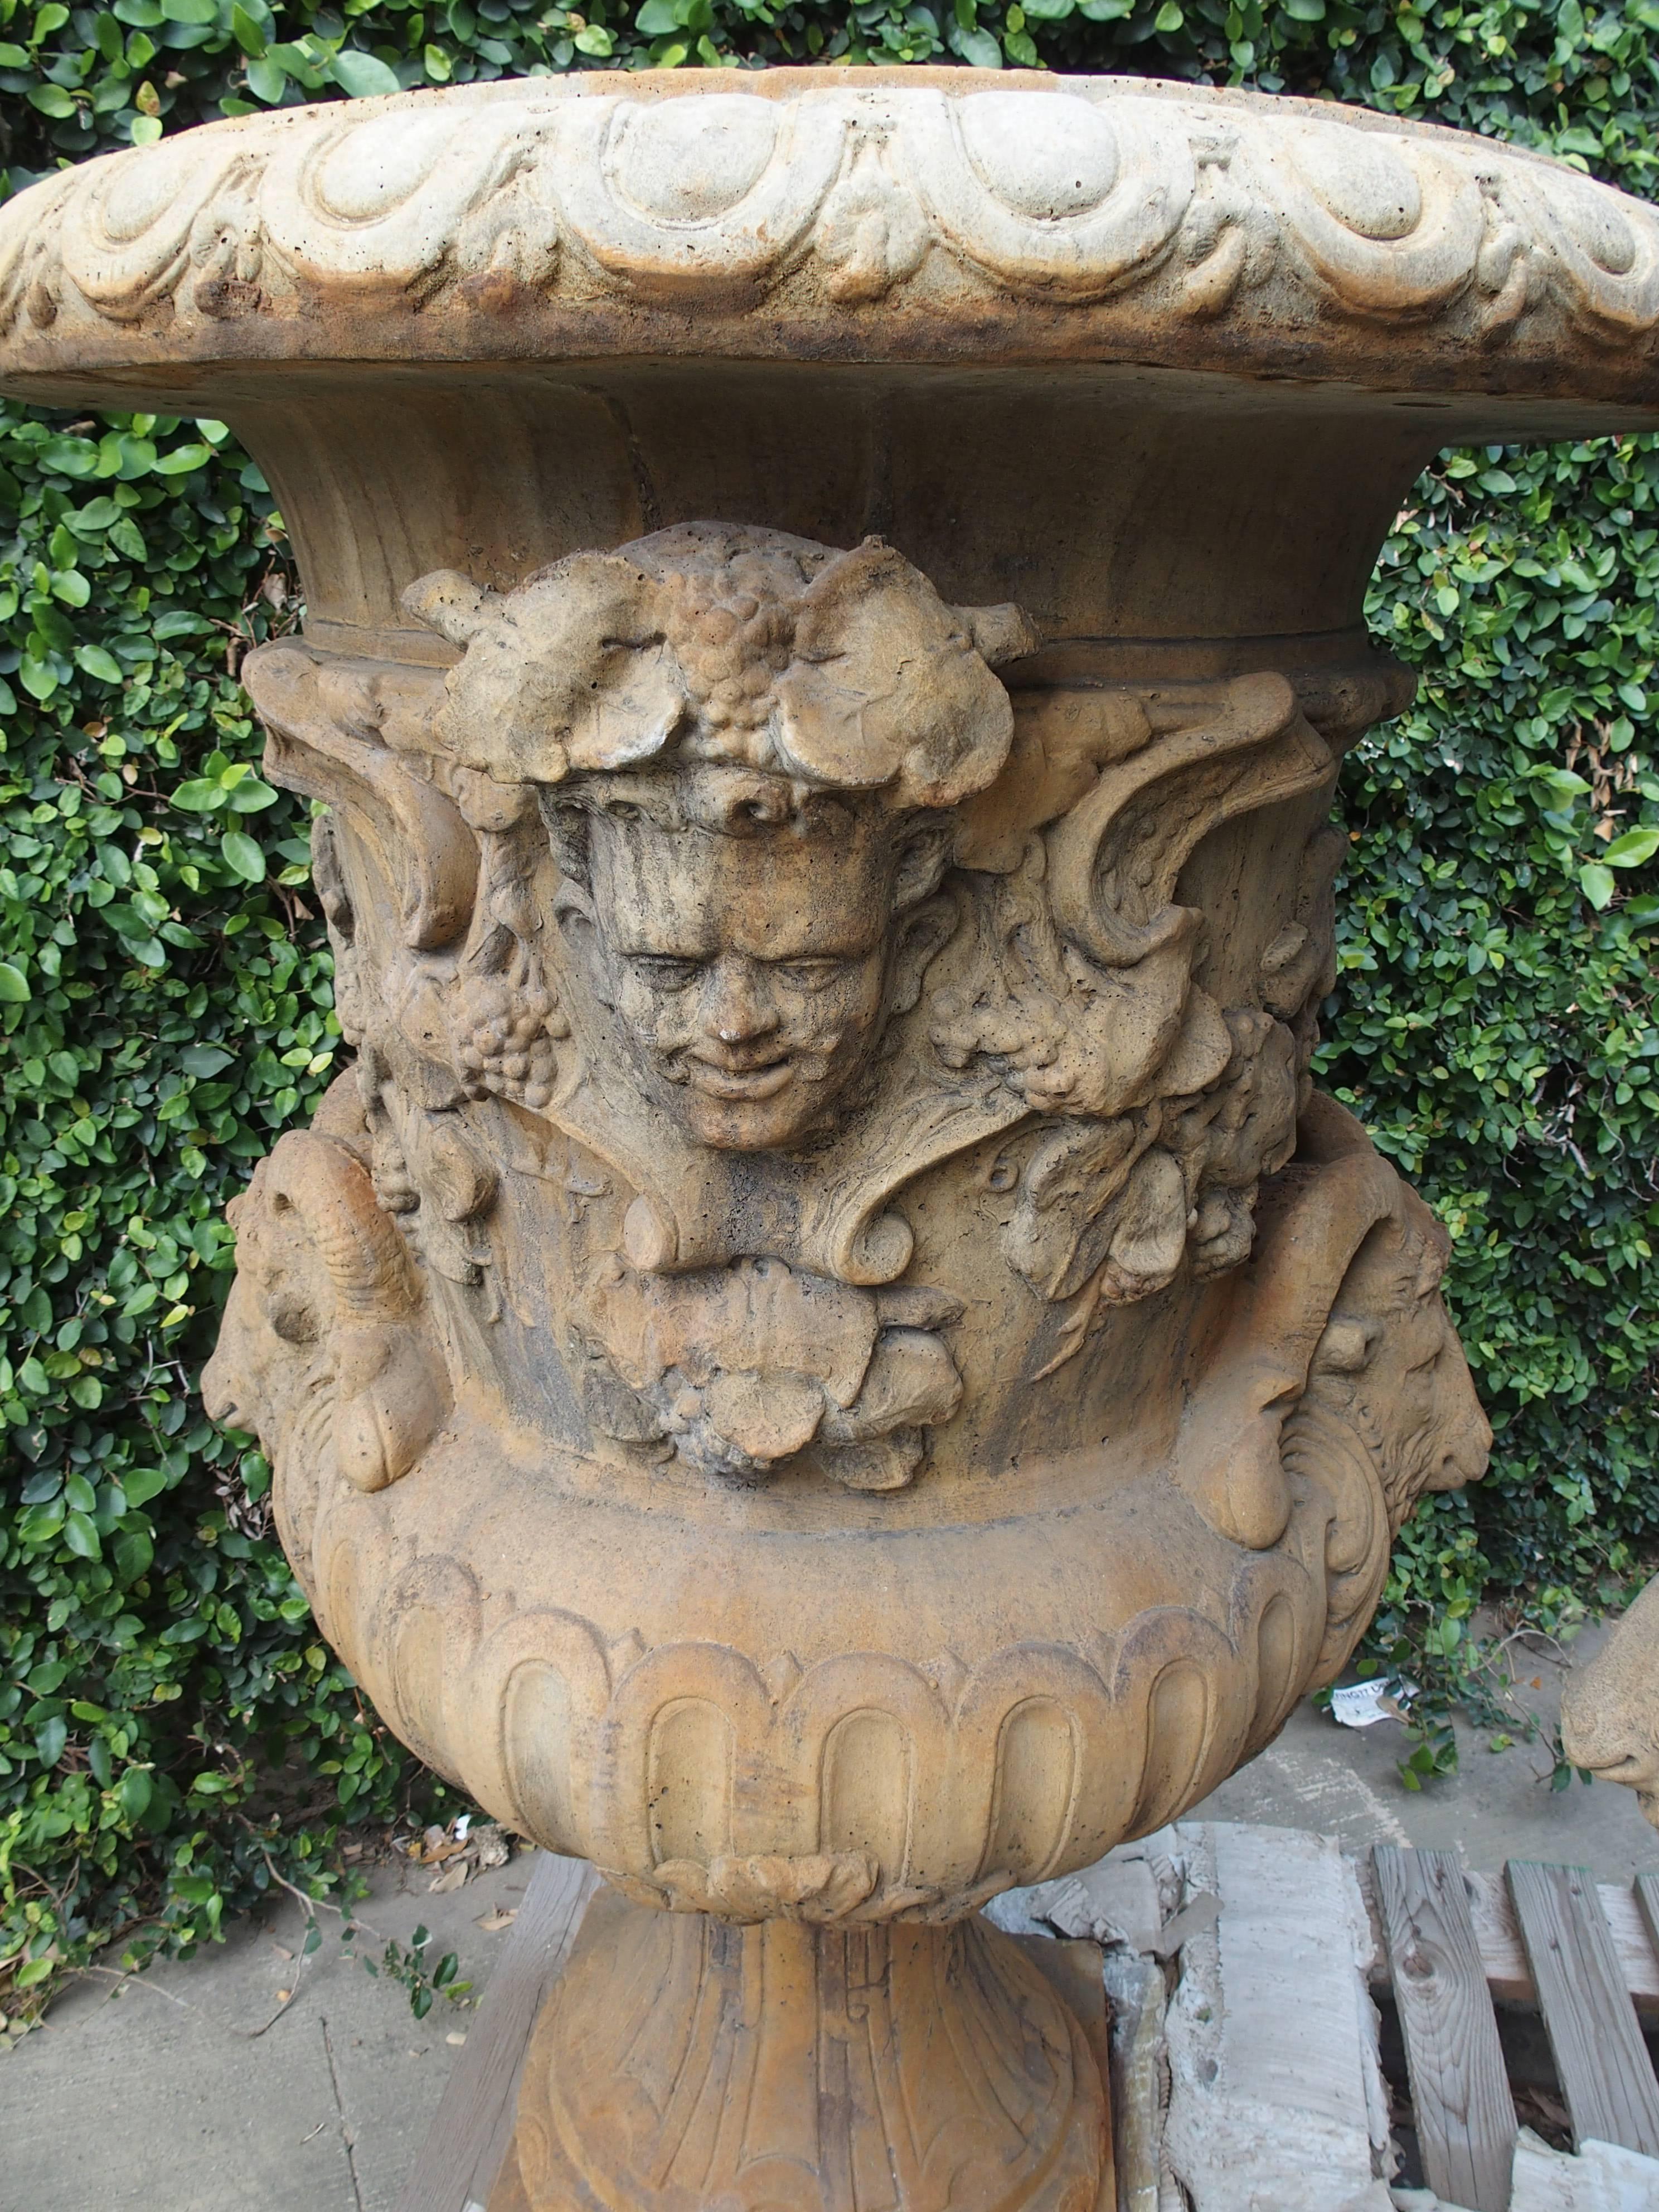 Contemporary Pair of Large European Cast Garden Urns with Mascarons, Rams Heads, and Grape 